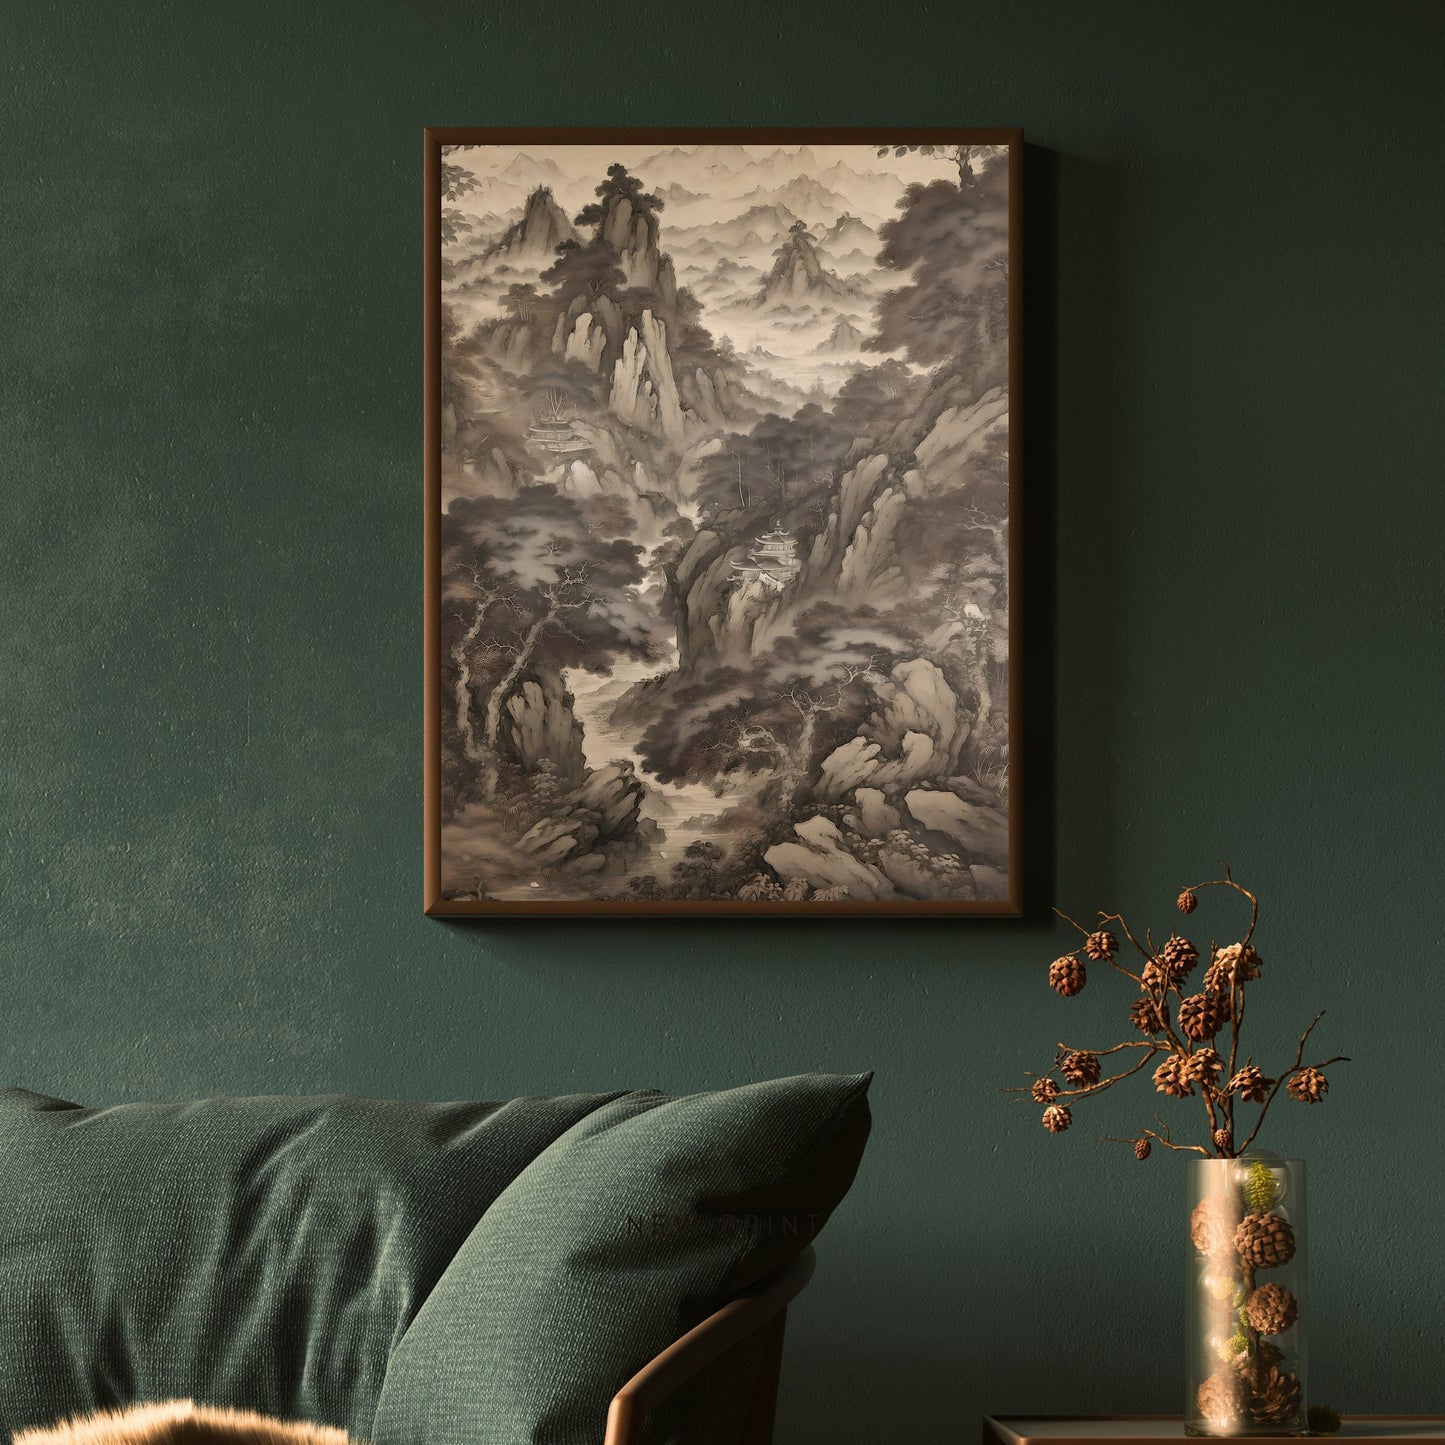 Antique Moody Japanese Painting, Brown Beige Paper Poster Prints Japanese mountains and monasteries, Earth Tone Baroque, Vintage Scenery Print